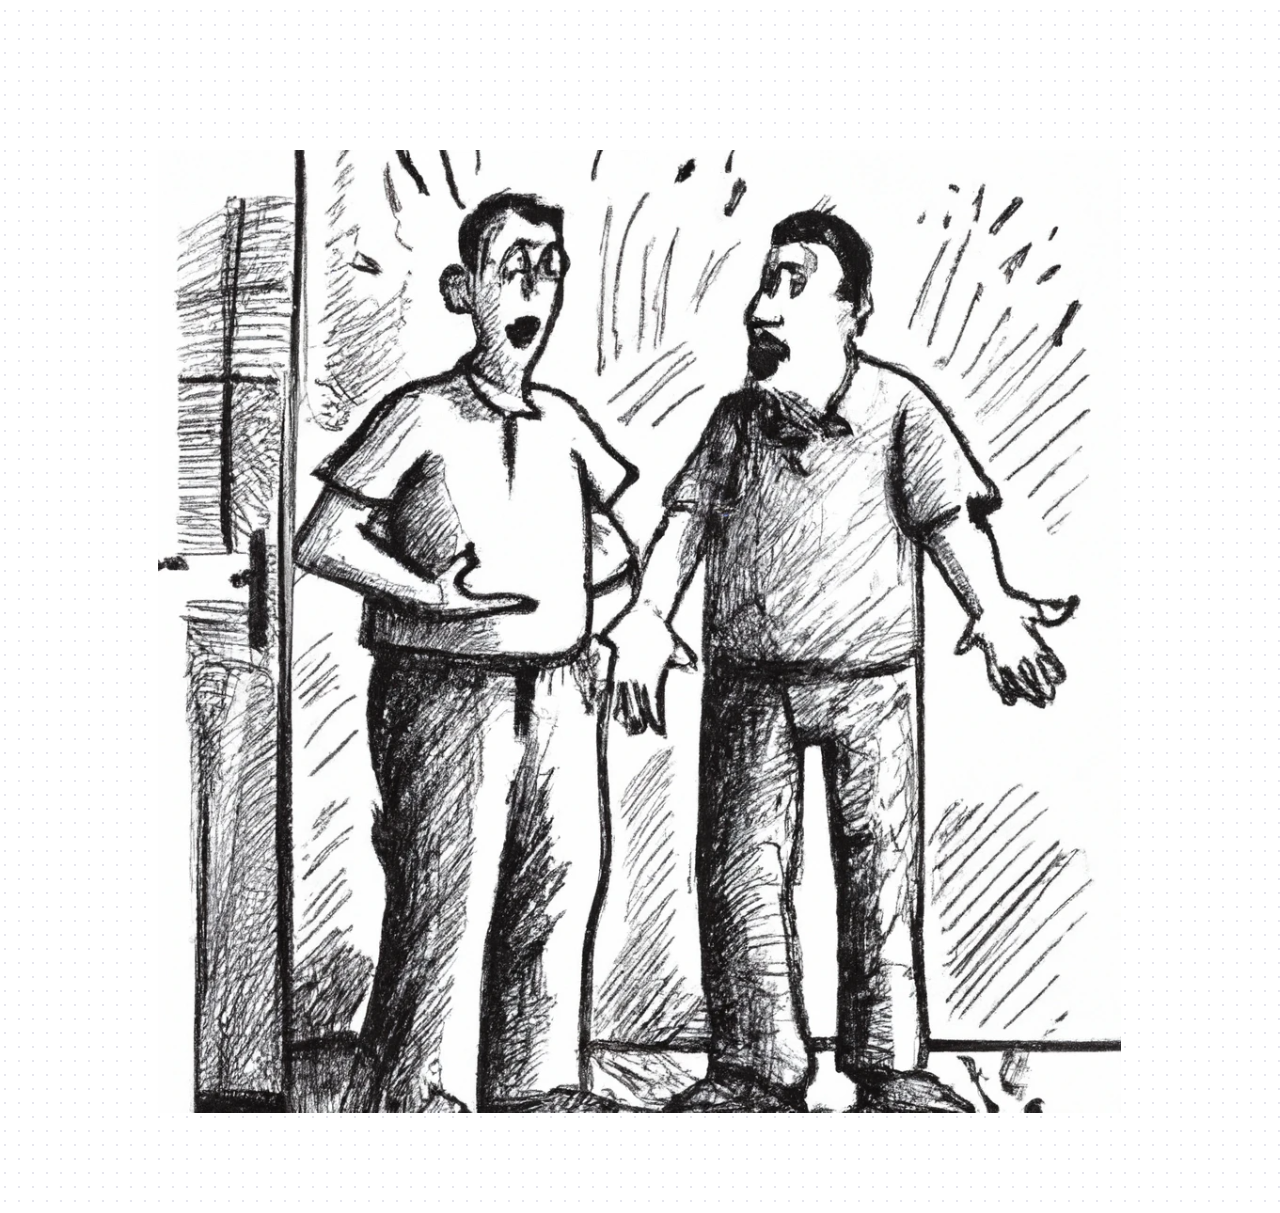 Dall-e2 Query: hatching style, two men standing, one surprised